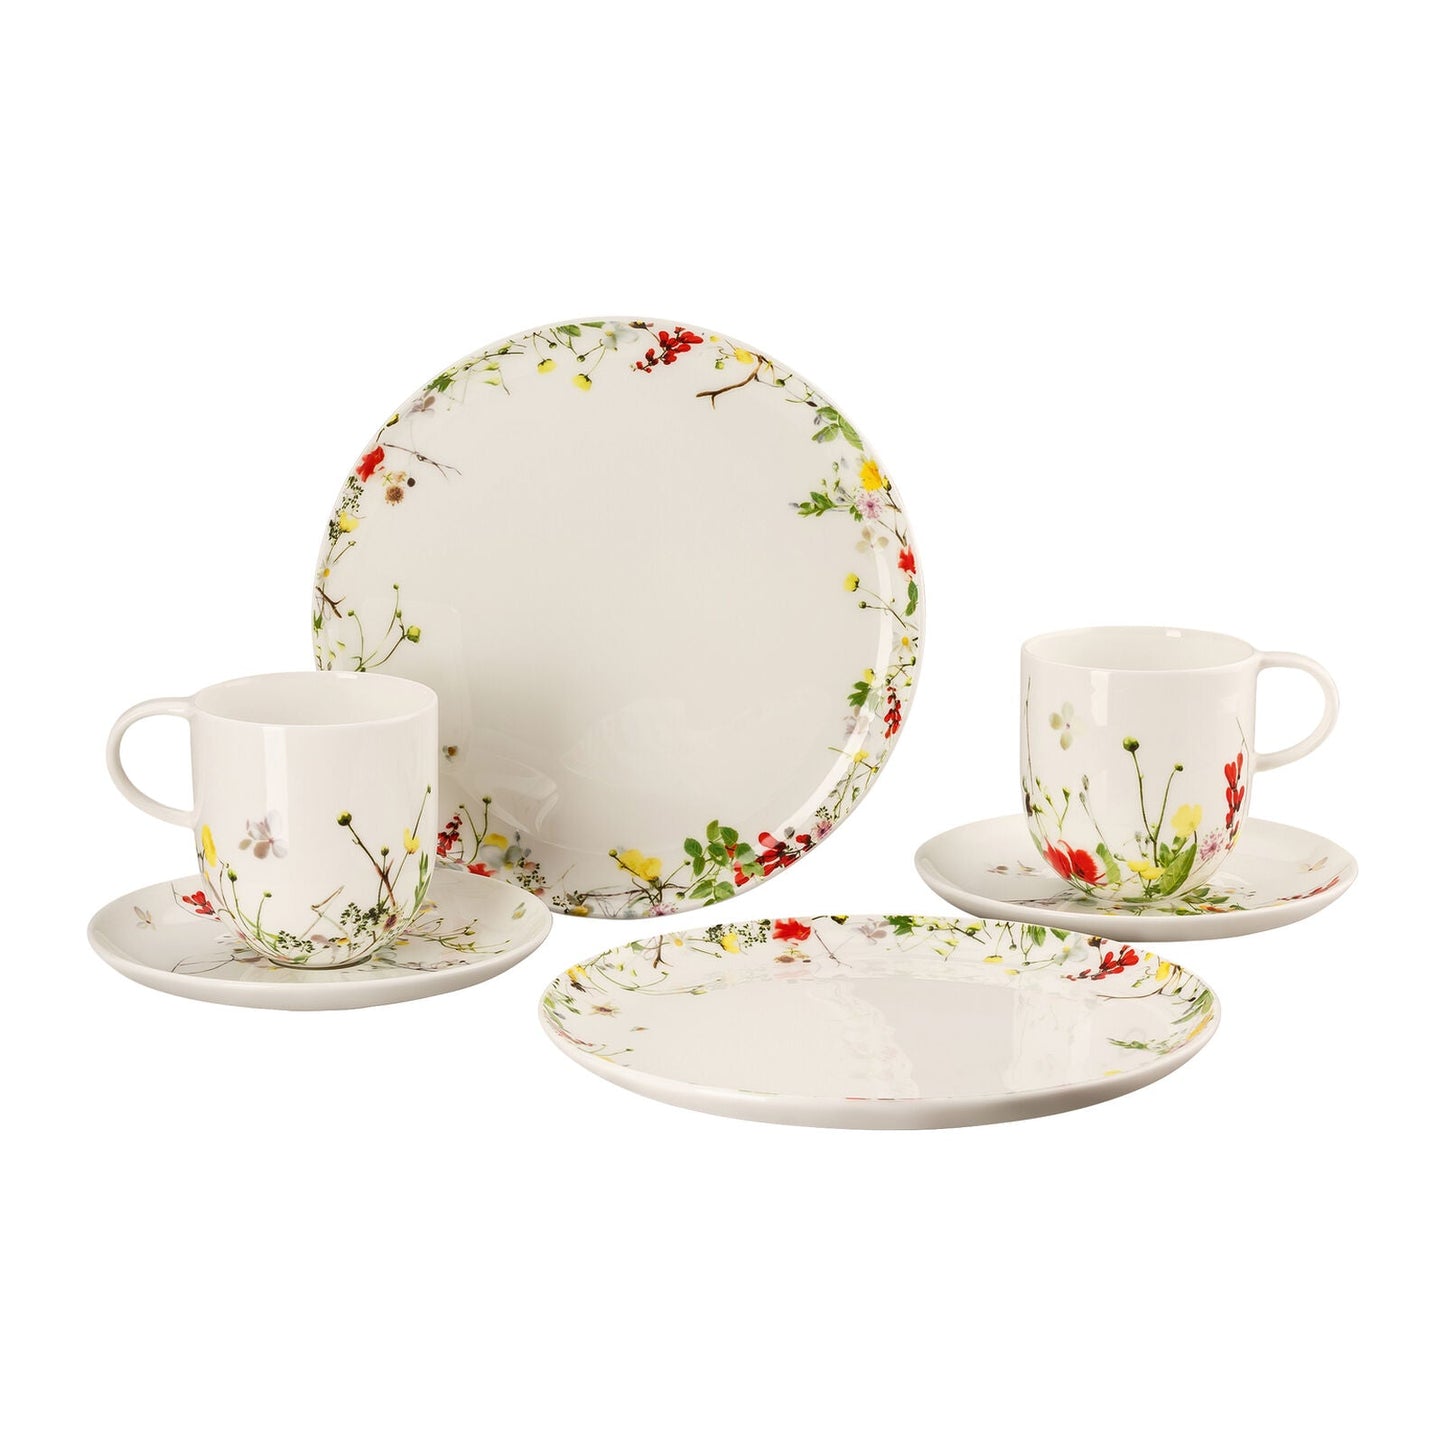 Set 6 Pieces with Mugs and Coupe Plates